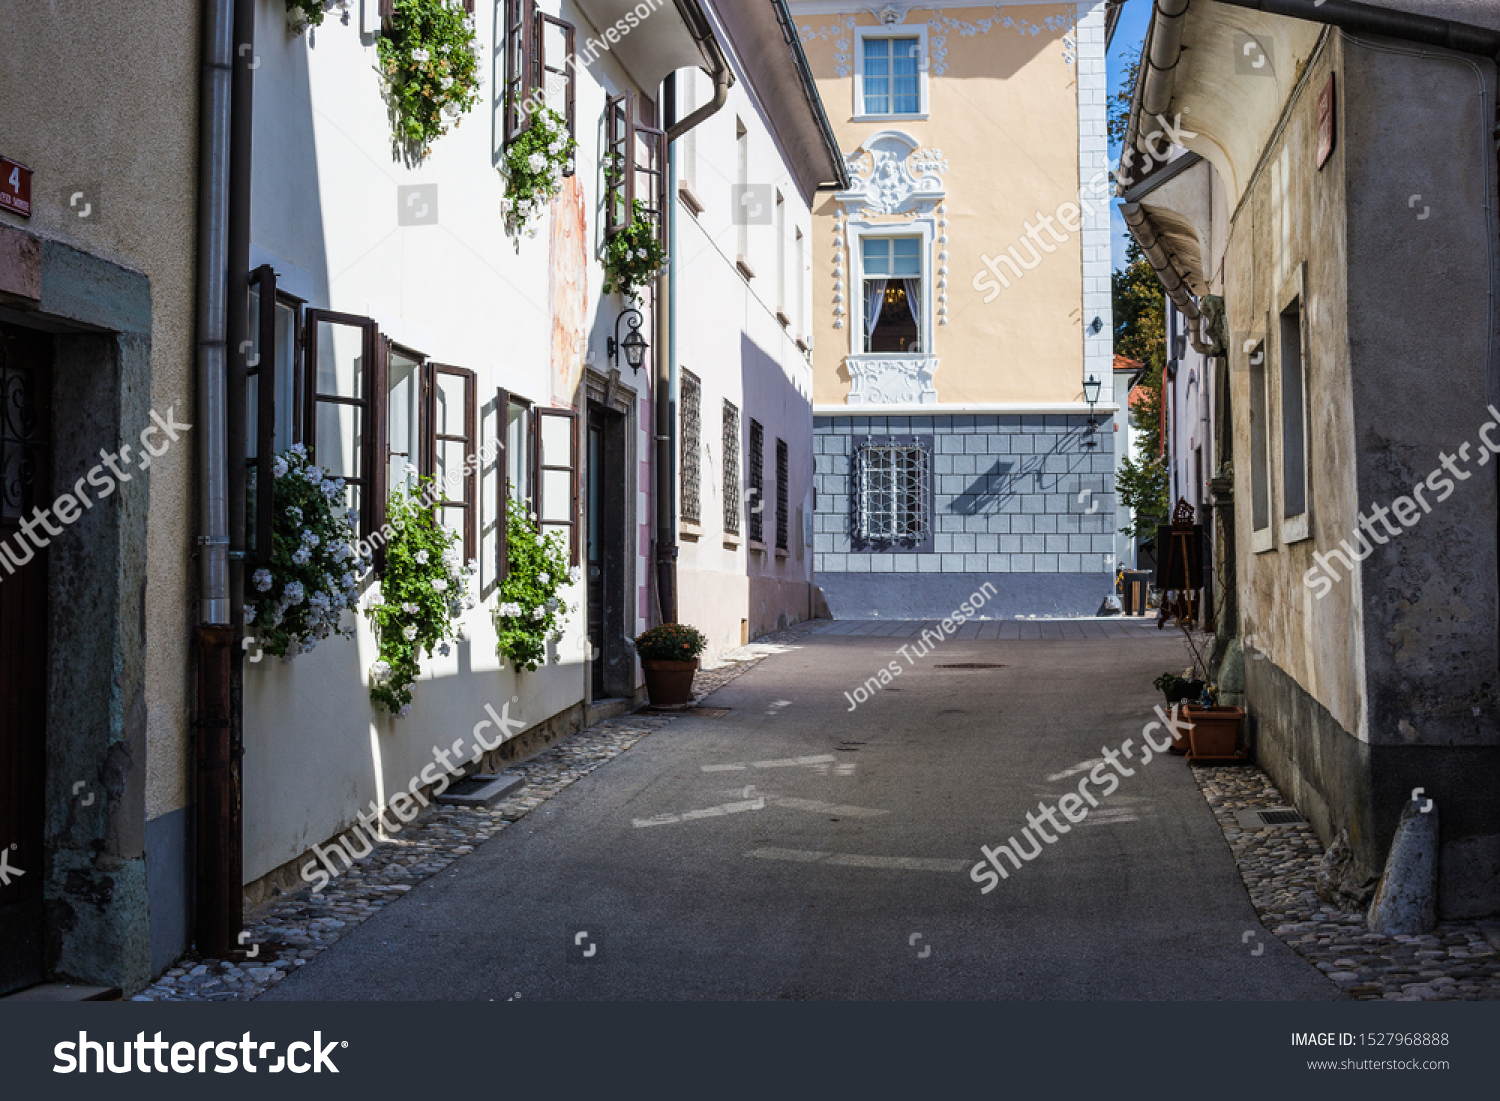 An old and beautiful street in Radovljica in Slovenia #1527968888